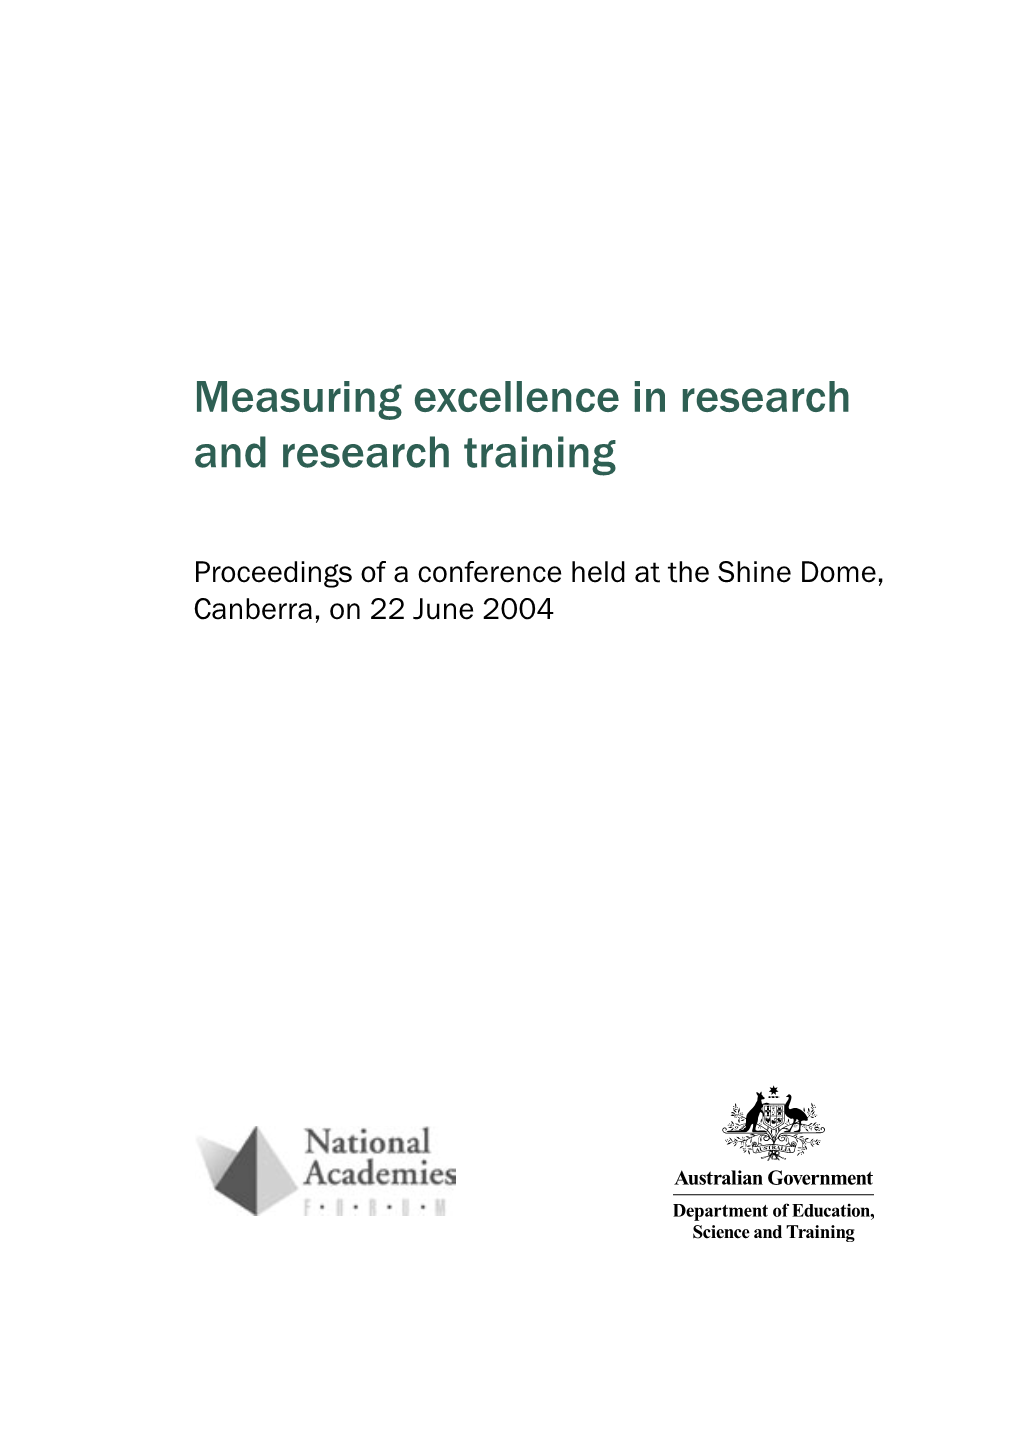 Measuring Excellence in Research and Research Training